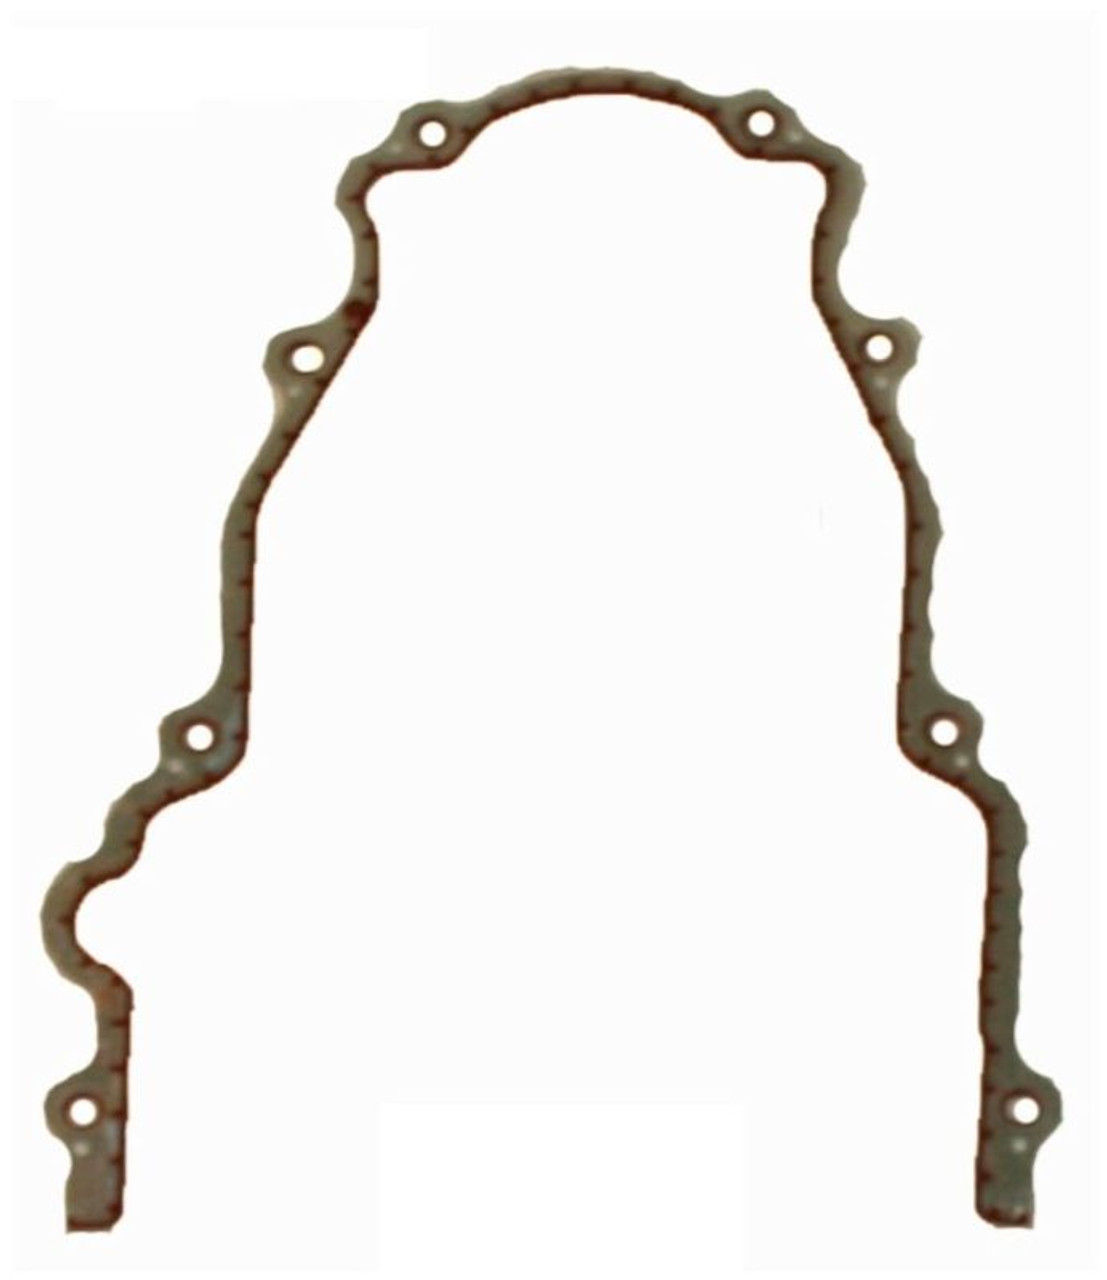 2009 Buick LaCrosse 5.3L Engine Timing Cover Gasket TCG293-A -545